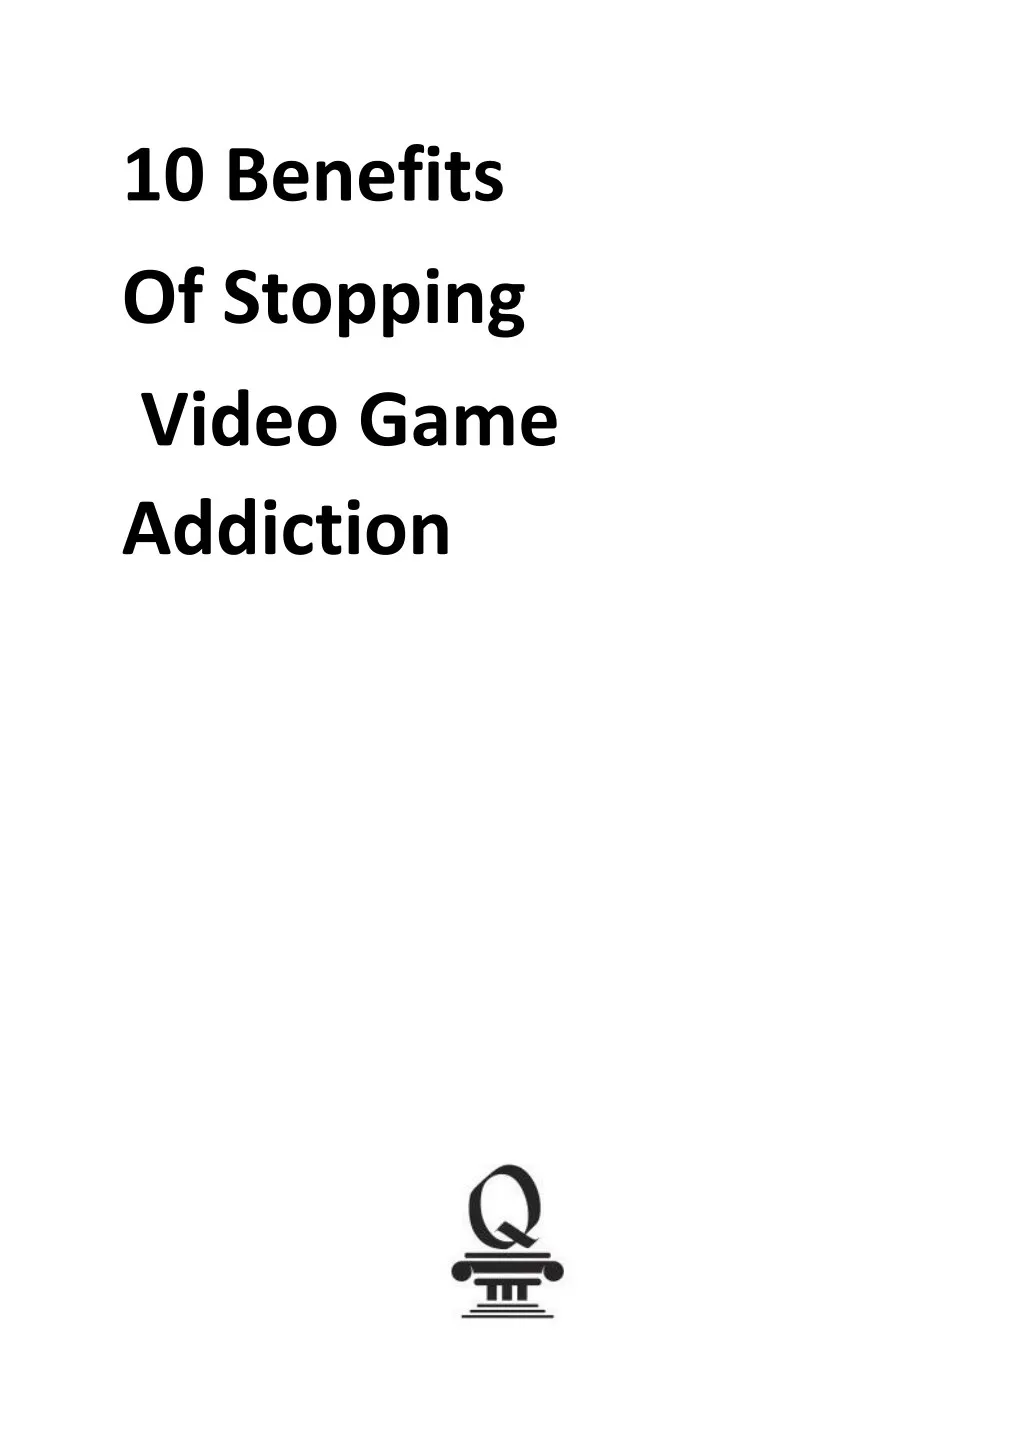 10 benefits of stopping video game addiction